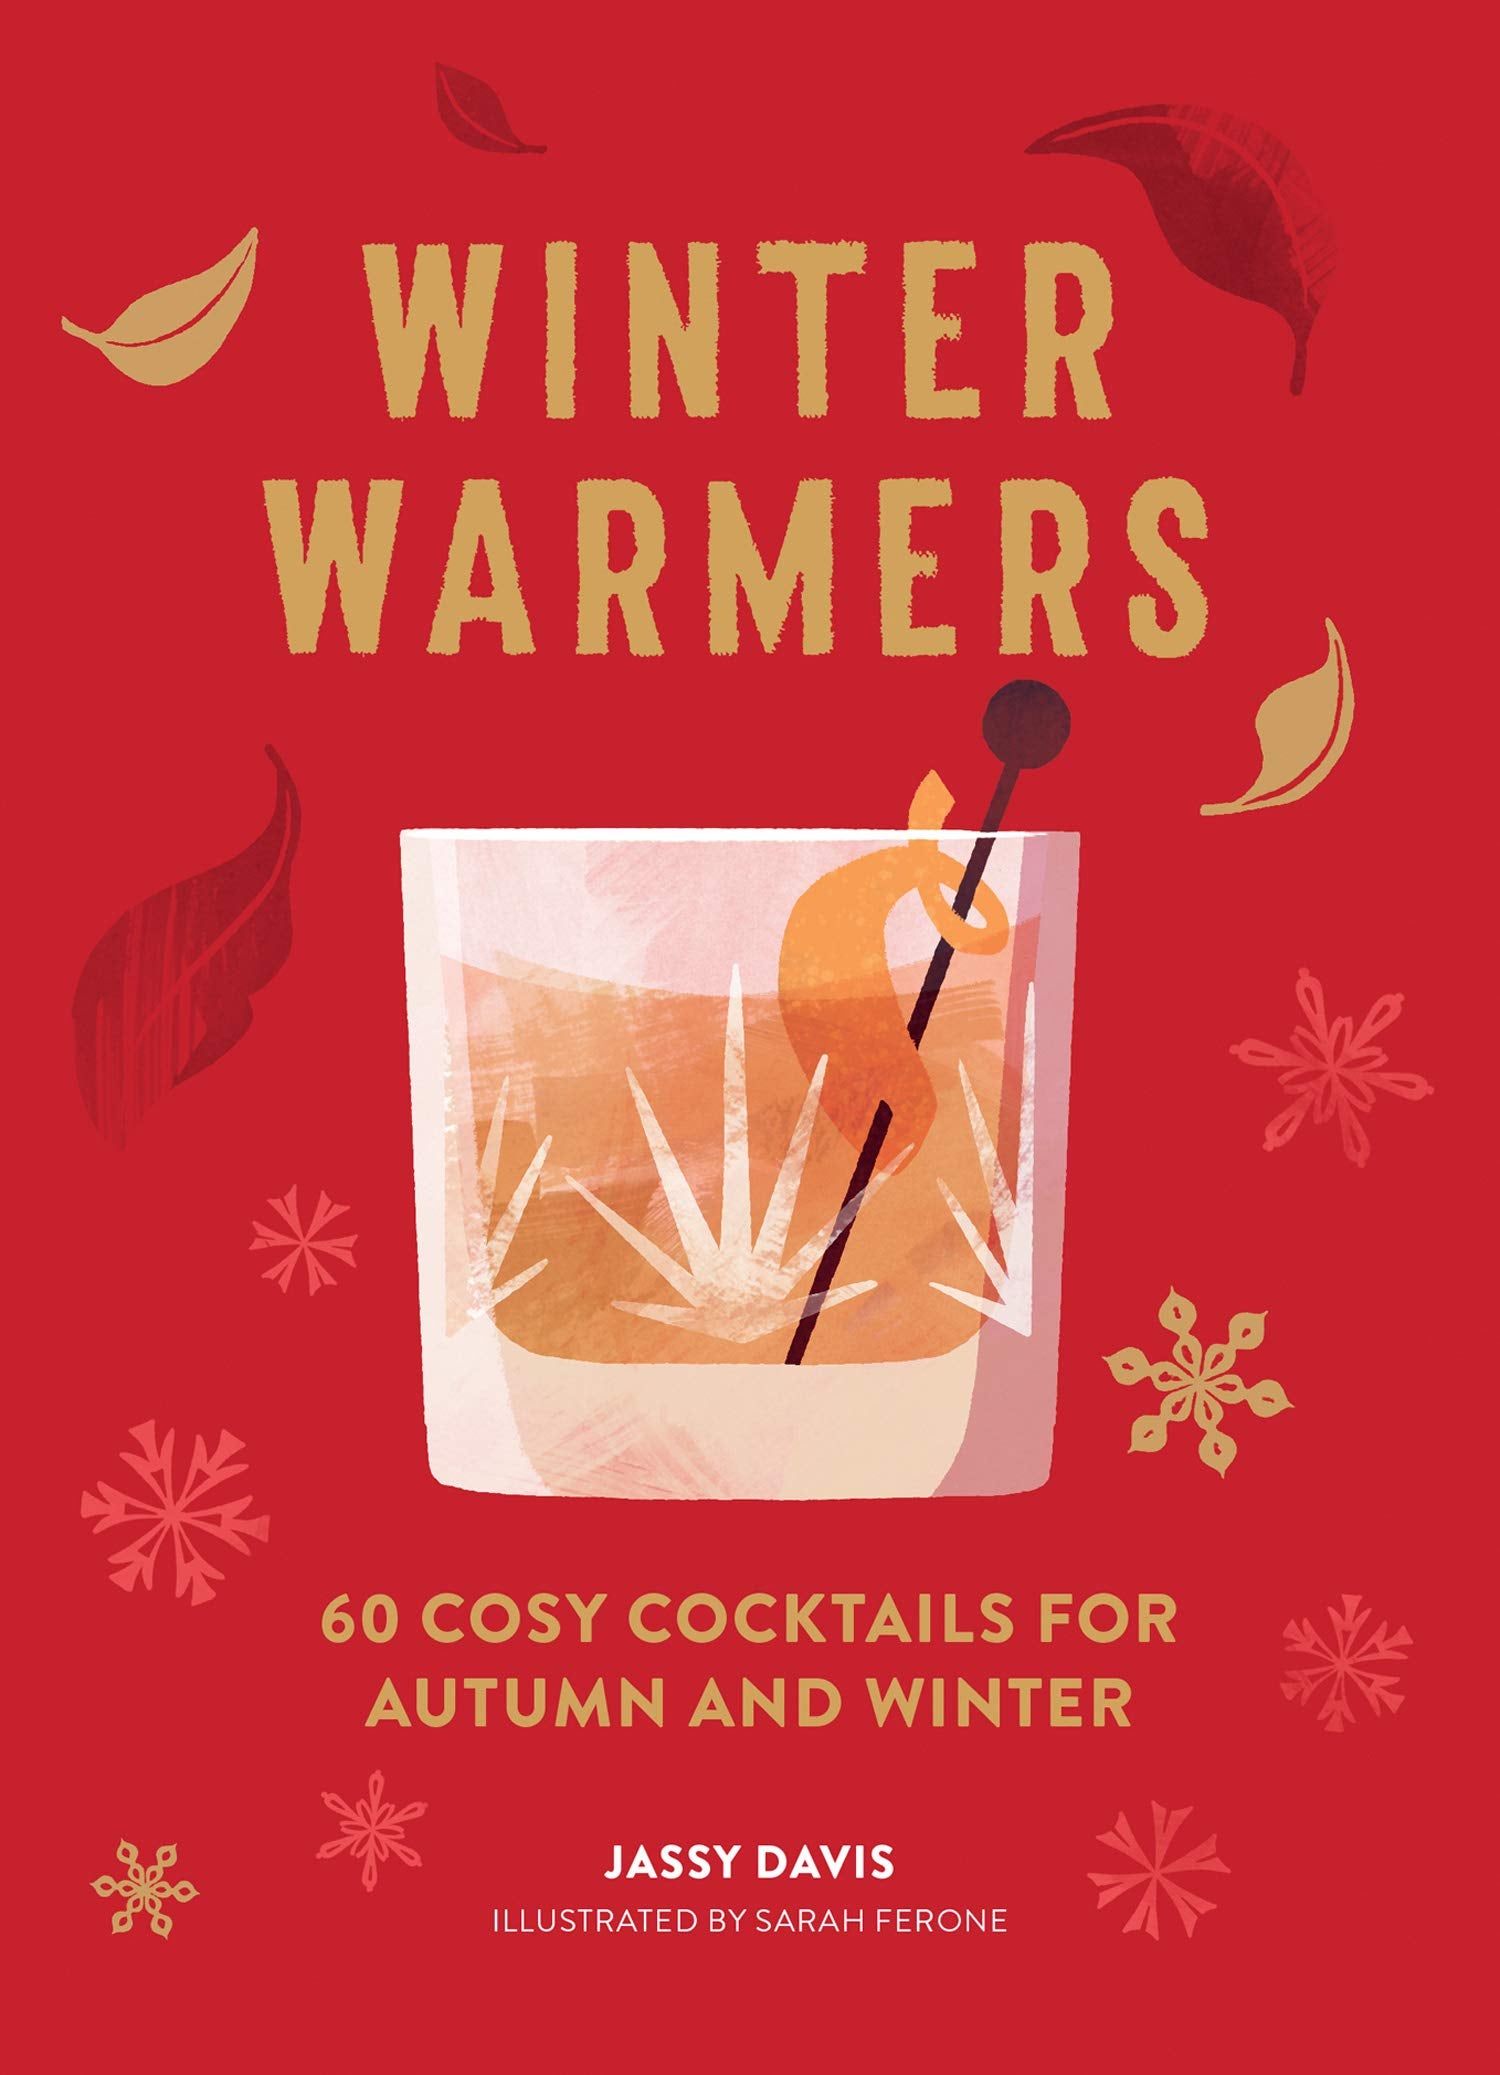 Winter Warmers: 60 Cosy Cocktails for Autumn and Winter (Jassy Davis)